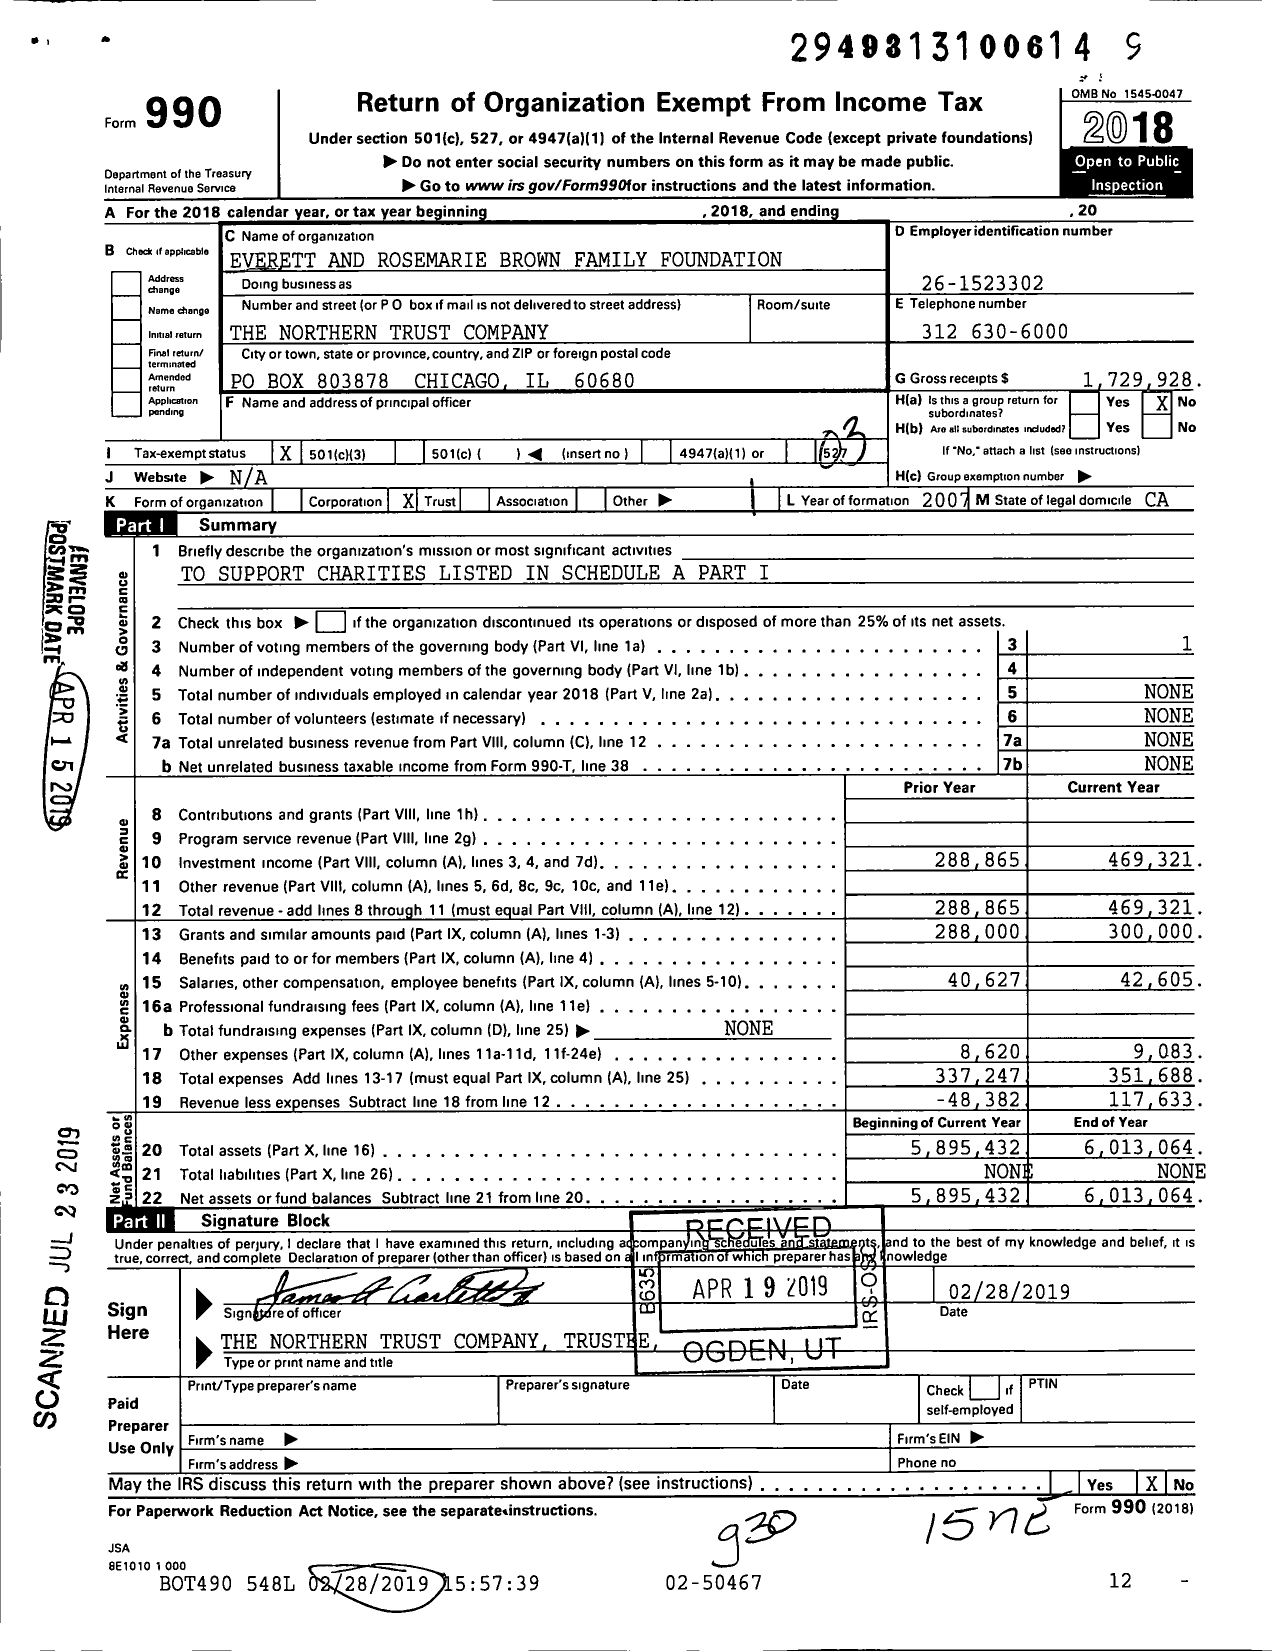 Image of first page of 2018 Form 990 for Everett and Rosemarie Brown Family Foundation